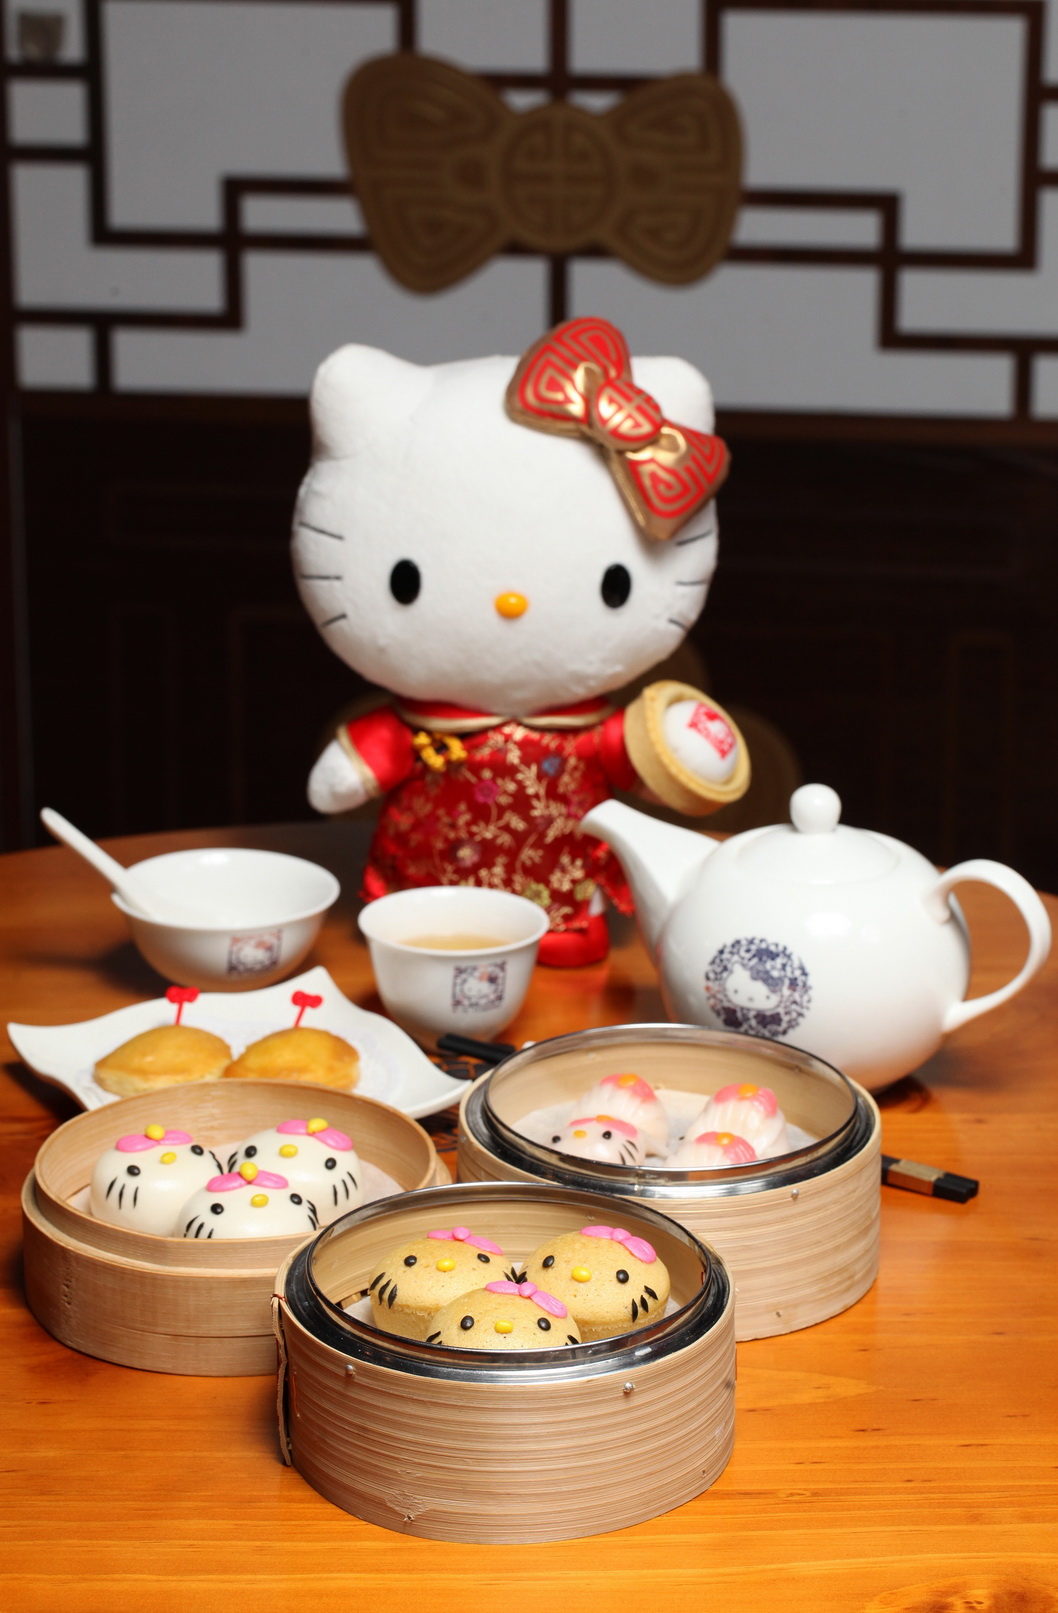 1st Chinese Cuisine of Hello Kitty Landed HK